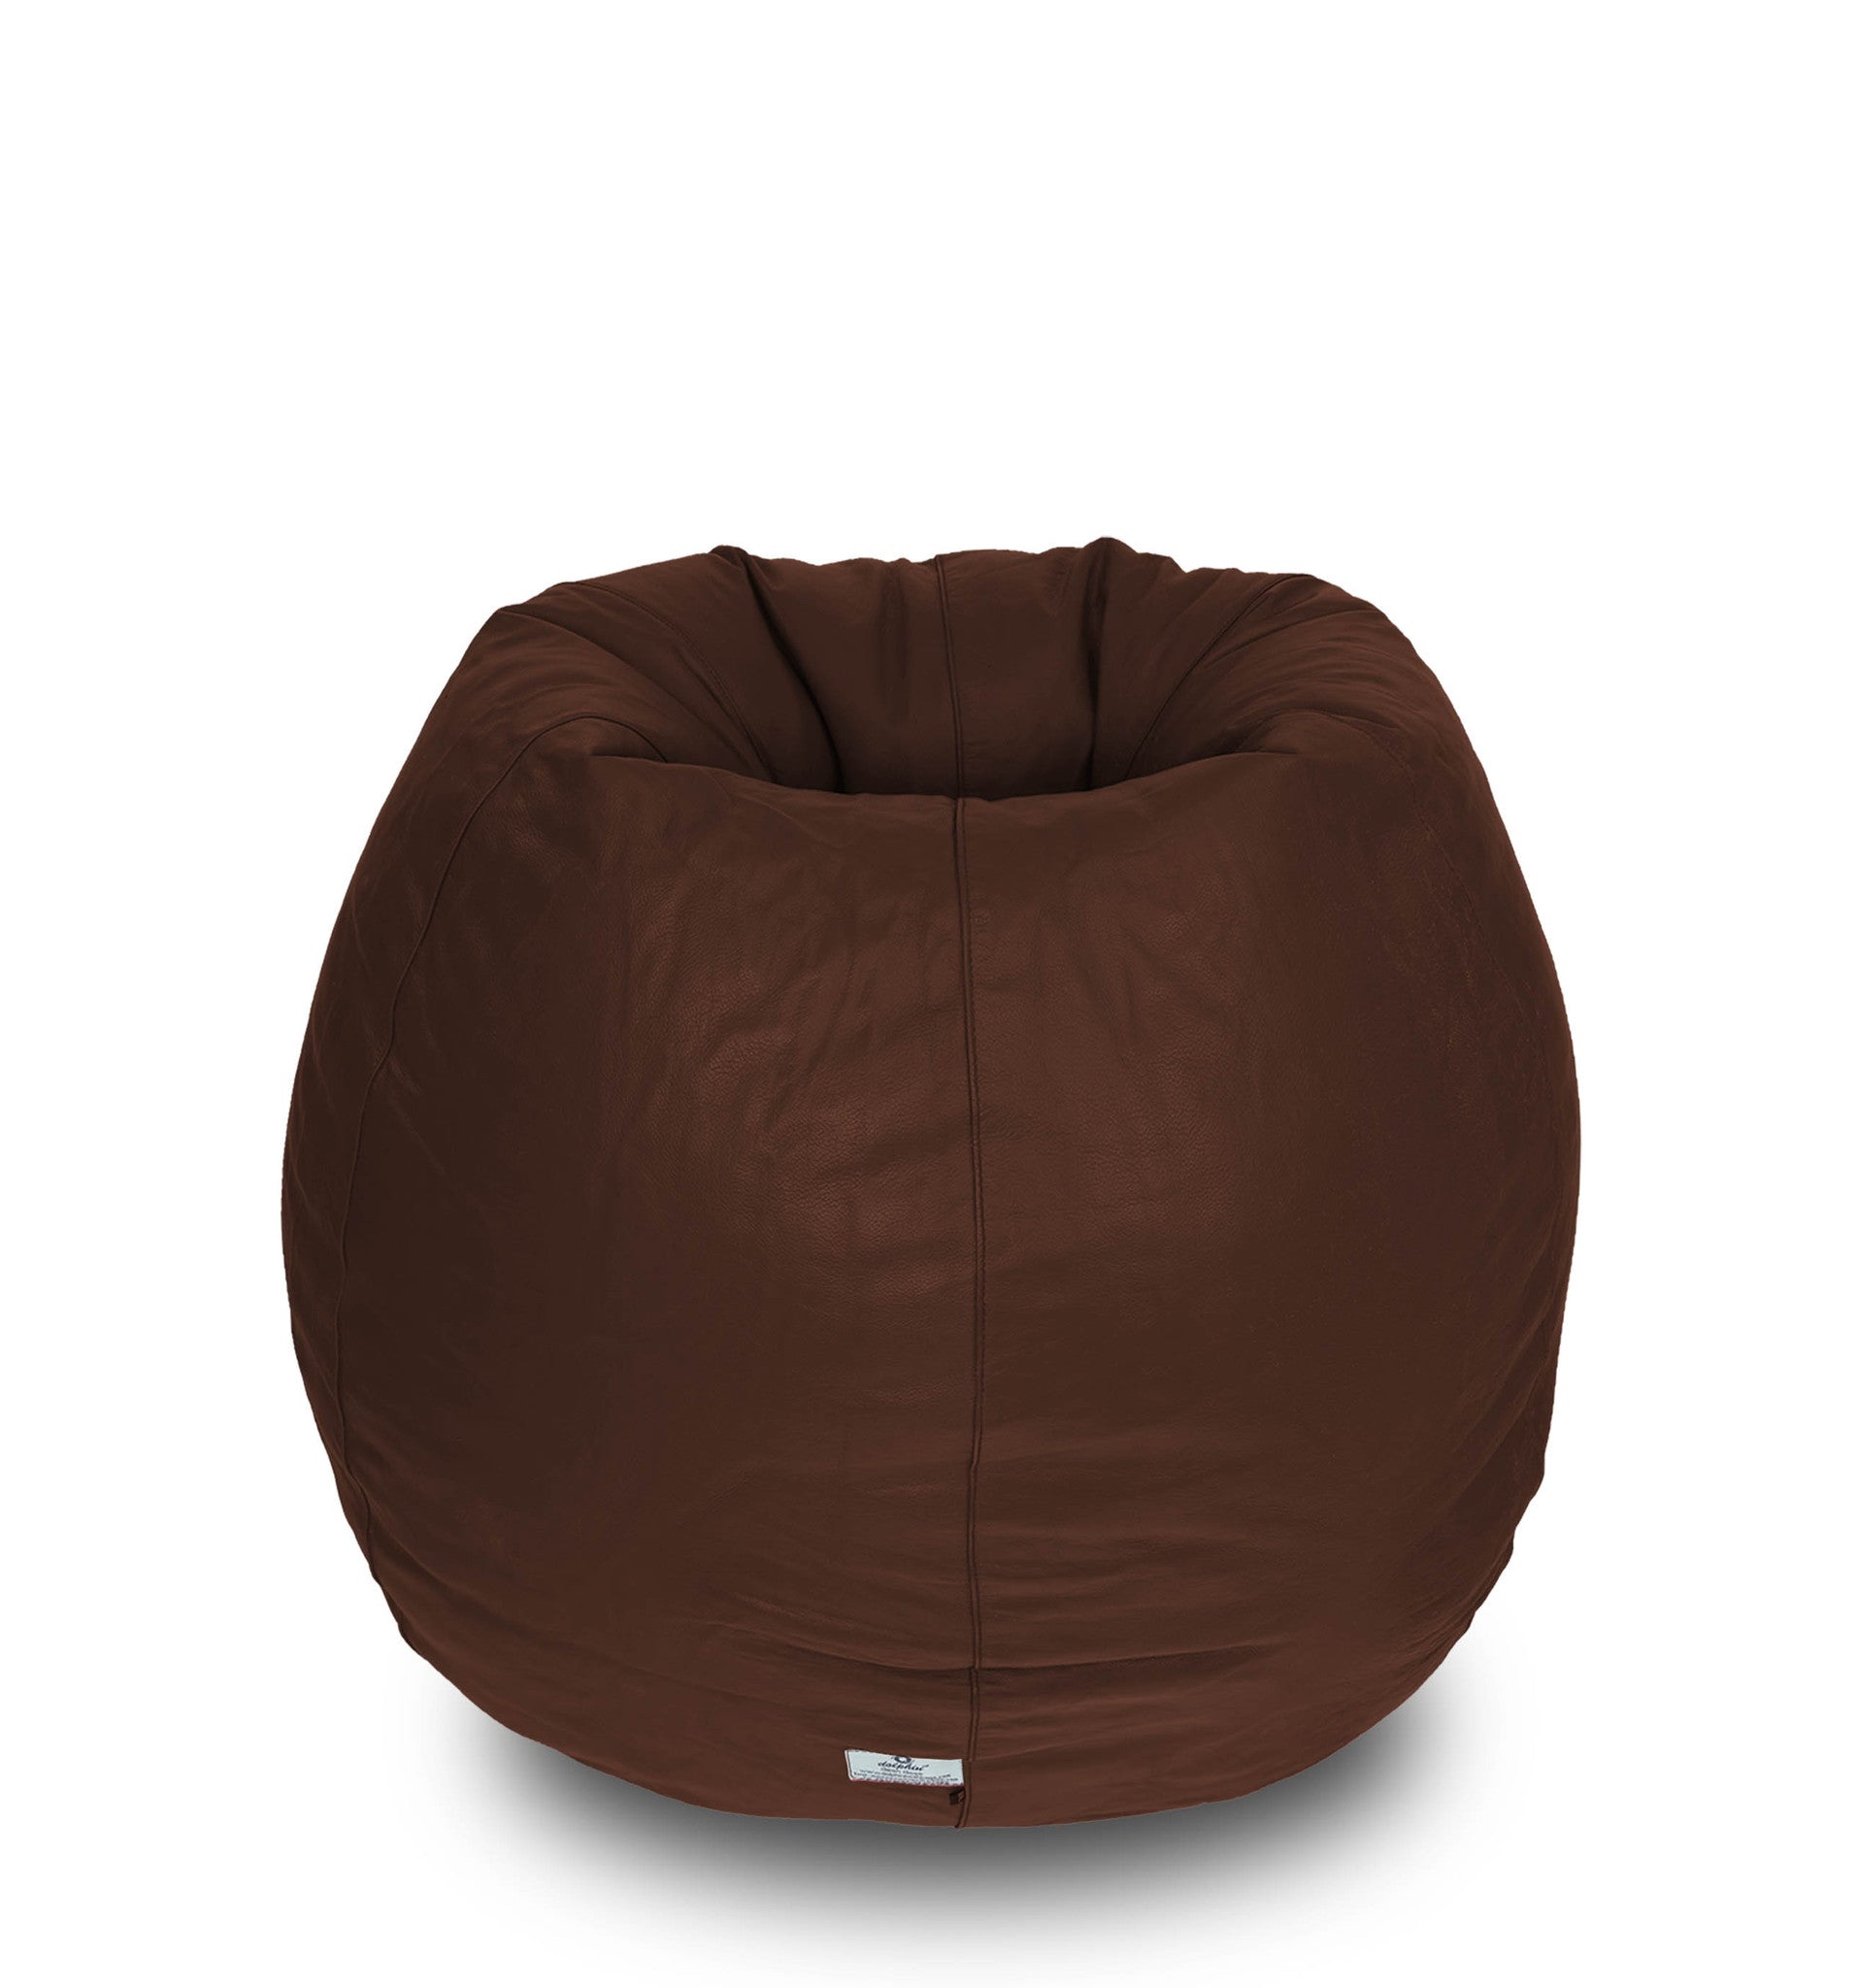 Amazon.com: Bean Bag Chair Bean Bag Cover Luxury Single Lazy Sofa Cover PU  Faux Suede Leather Bean Bag Pouf Chair for Bedroom Living Room Garden,  Without Filling Bean Bag Cover (Color :